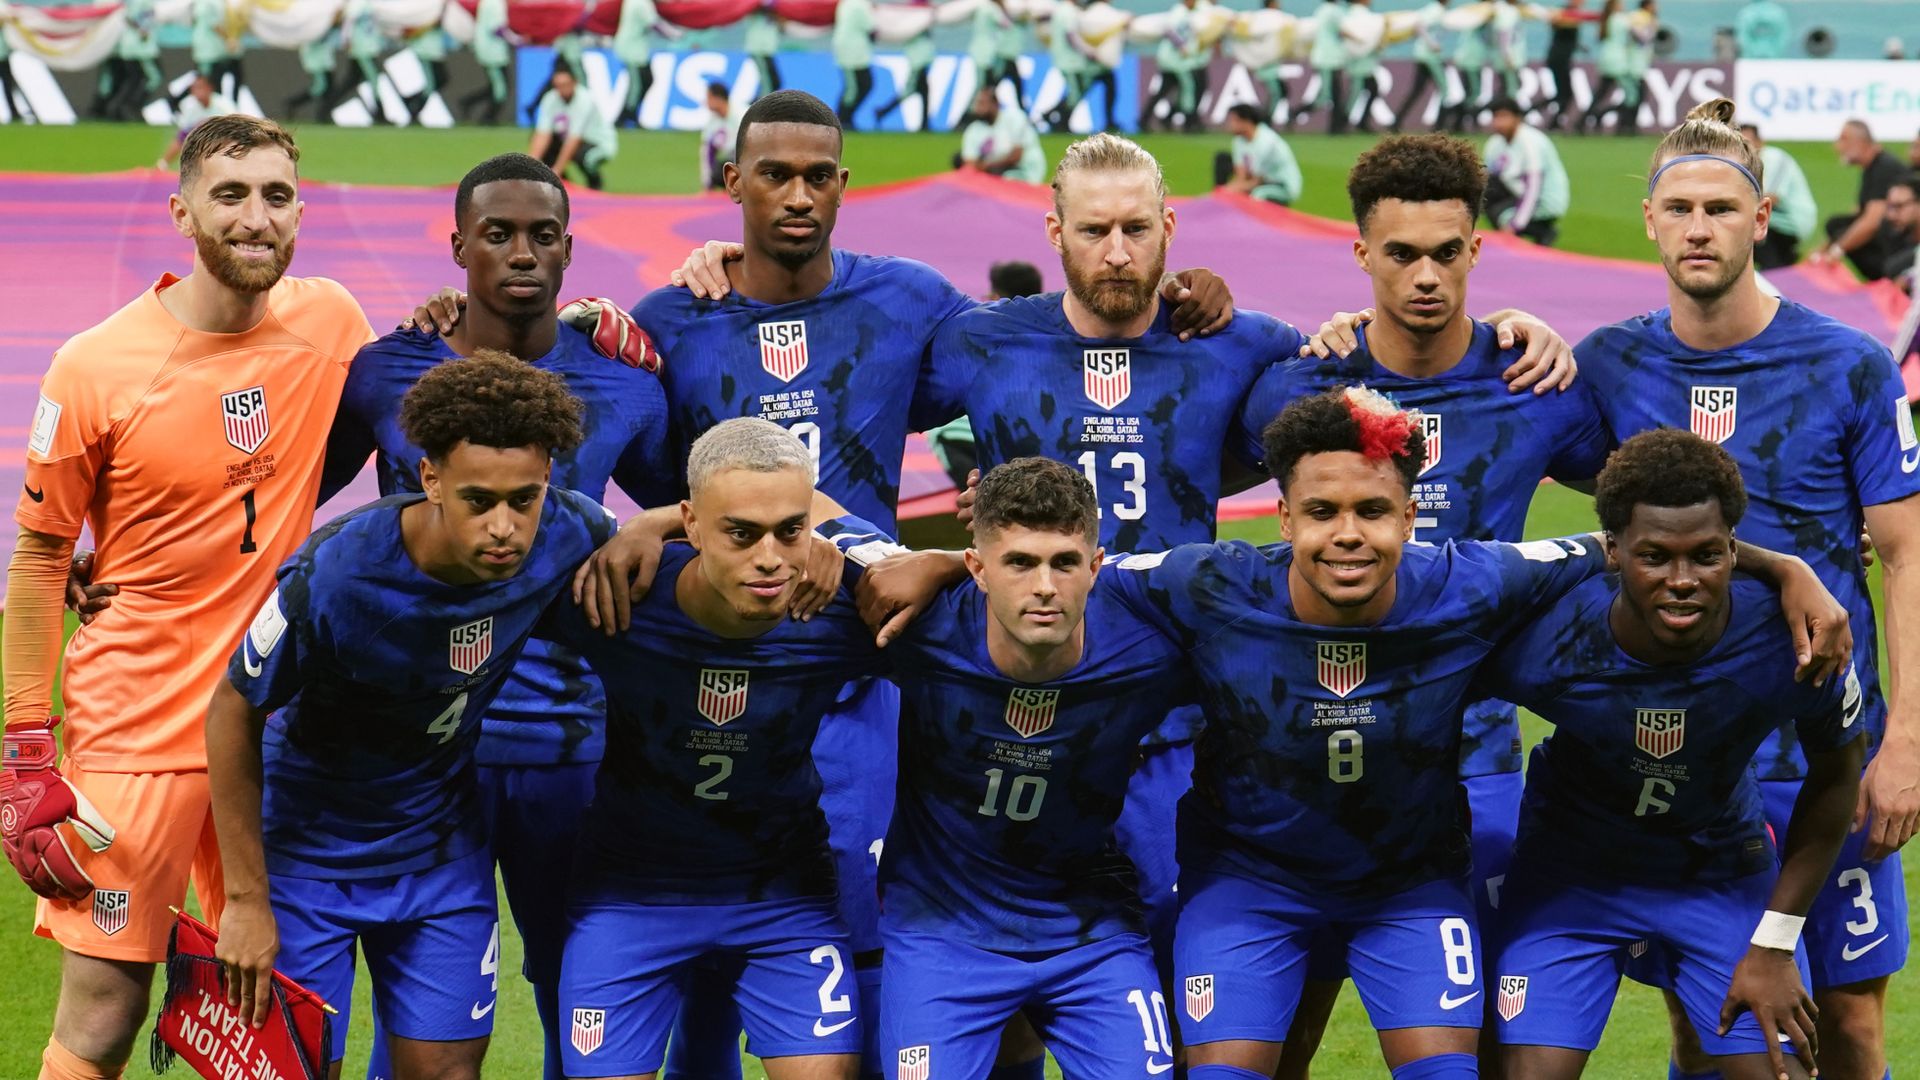 USA to trouble Netherlands? - 'They're very dangerous'